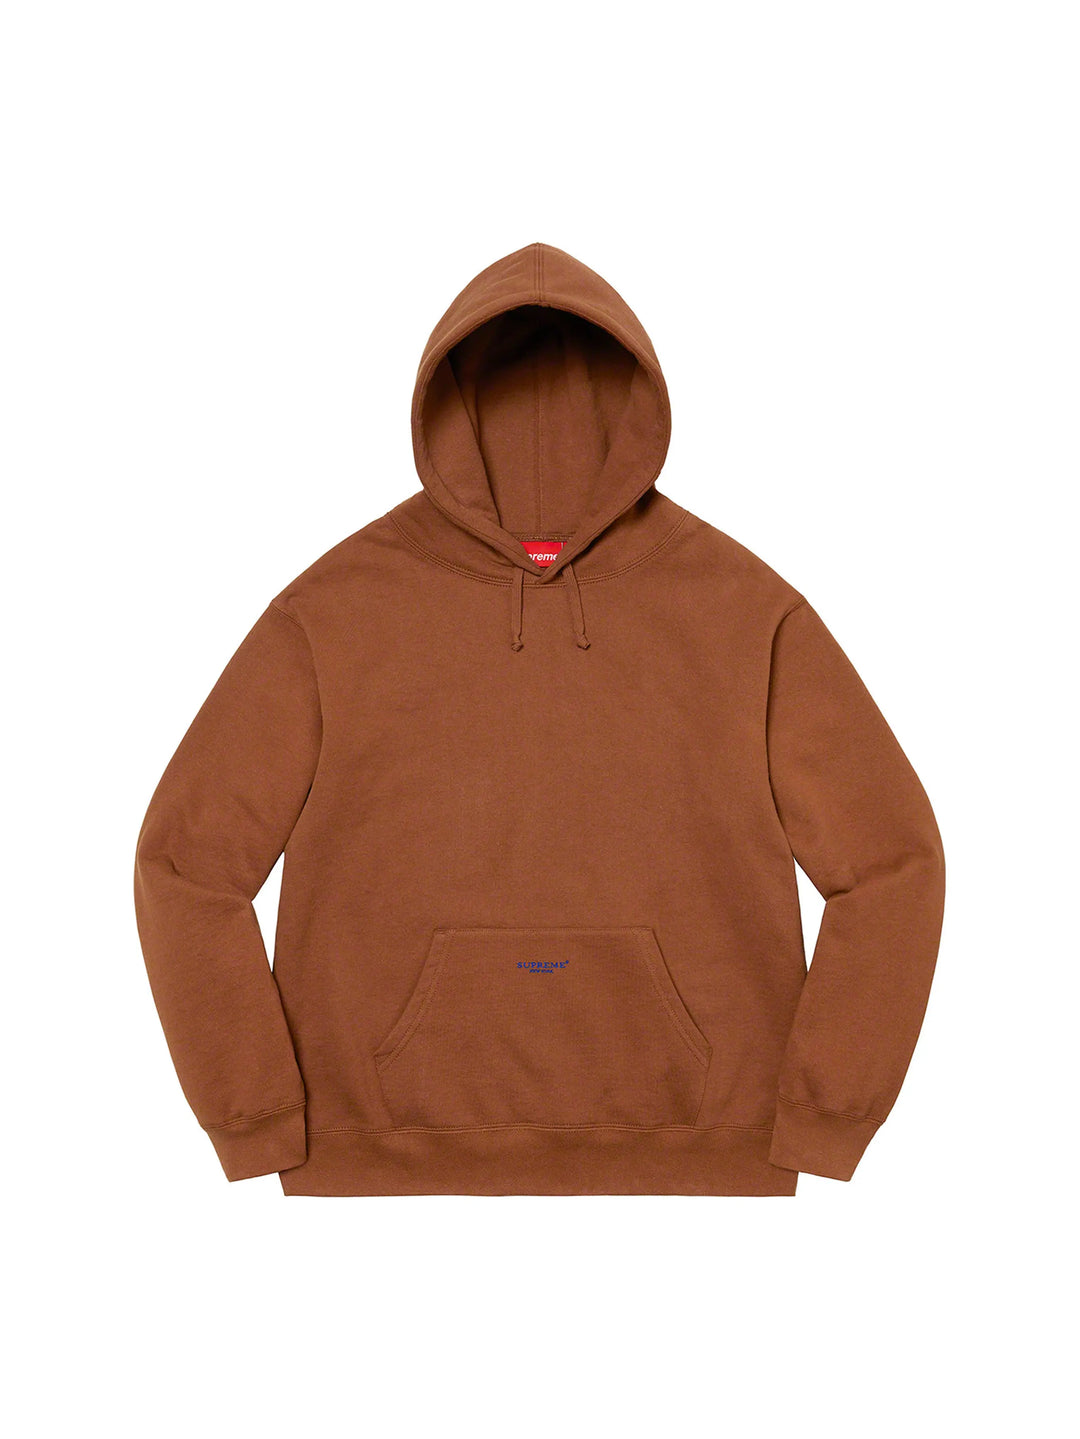 Supreme Micro Logo Hooded Sweatshirt (SS22) Brown in Auckland, New Zealand - Shop name